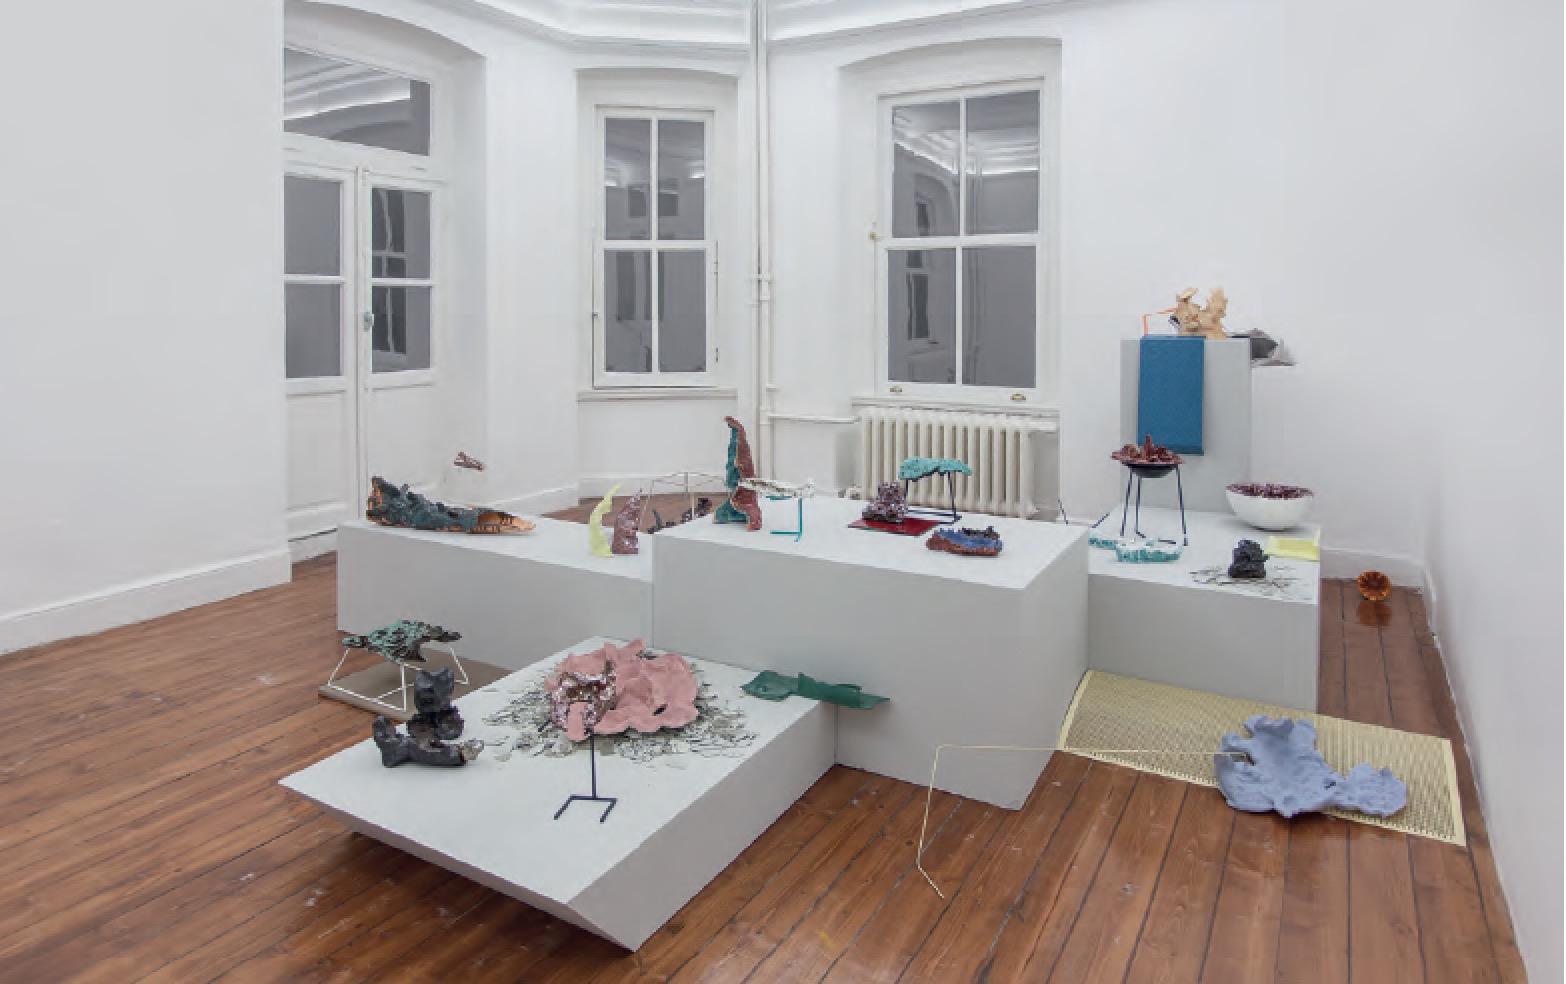 Anthropophagy, 2013 Glazed ceramics, wood, iron, paint, various materials Variable dimensions Installation view, ‘Aeolian’ exhibition, Rodeo, Istanbul - Emre Hüner - Courtesy the artist and Rodeo, London - Photo: Ridvan Bayrakoglu